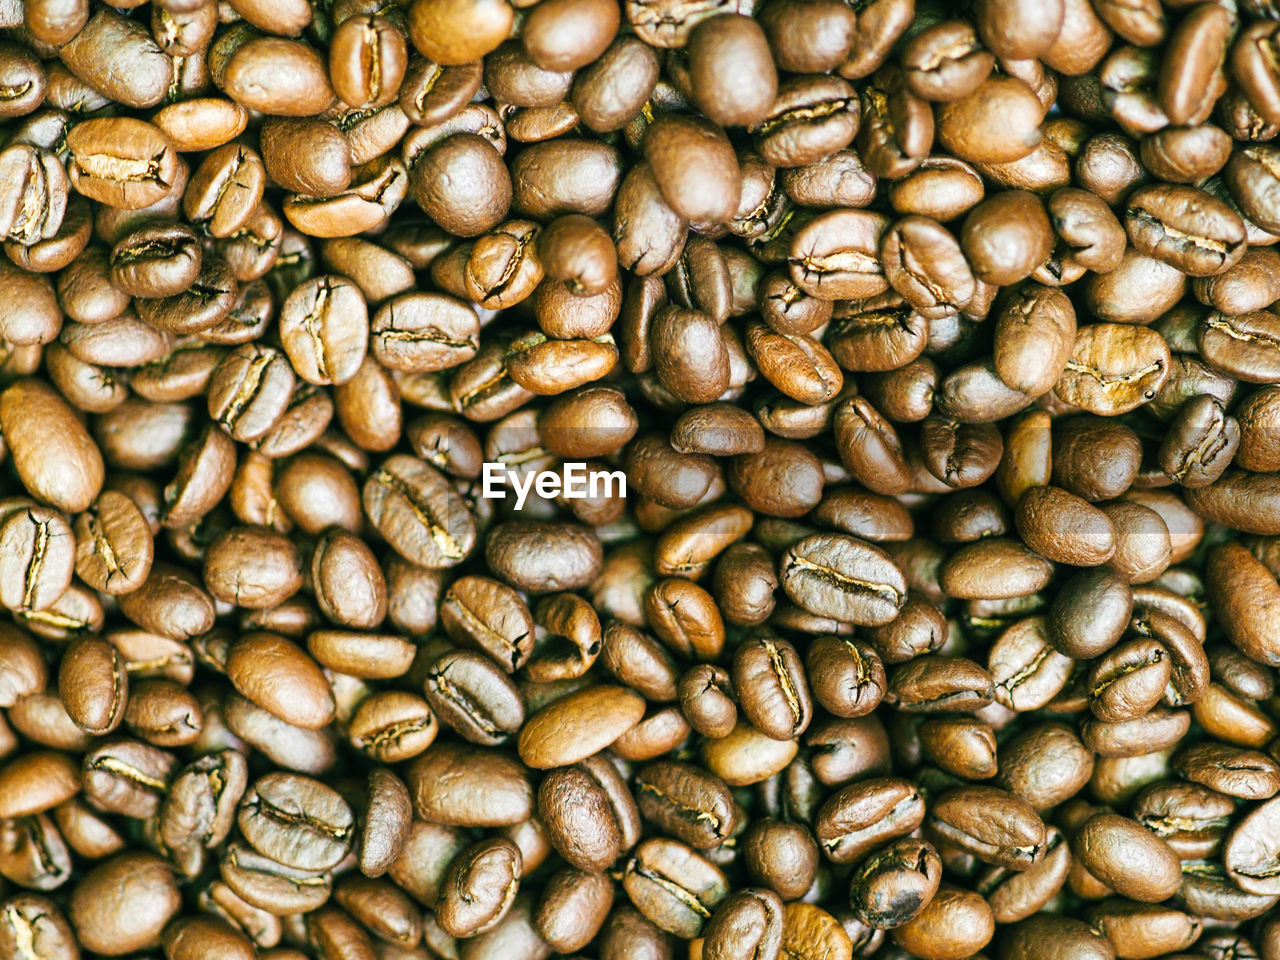 food and drink, large group of objects, full frame, abundance, backgrounds, food, freshness, brown, crop, no people, still life, produce, sunflower seed, coffee, roasted coffee bean, close-up, pattern, vegetable, day, healthy eating, repetition, wellbeing